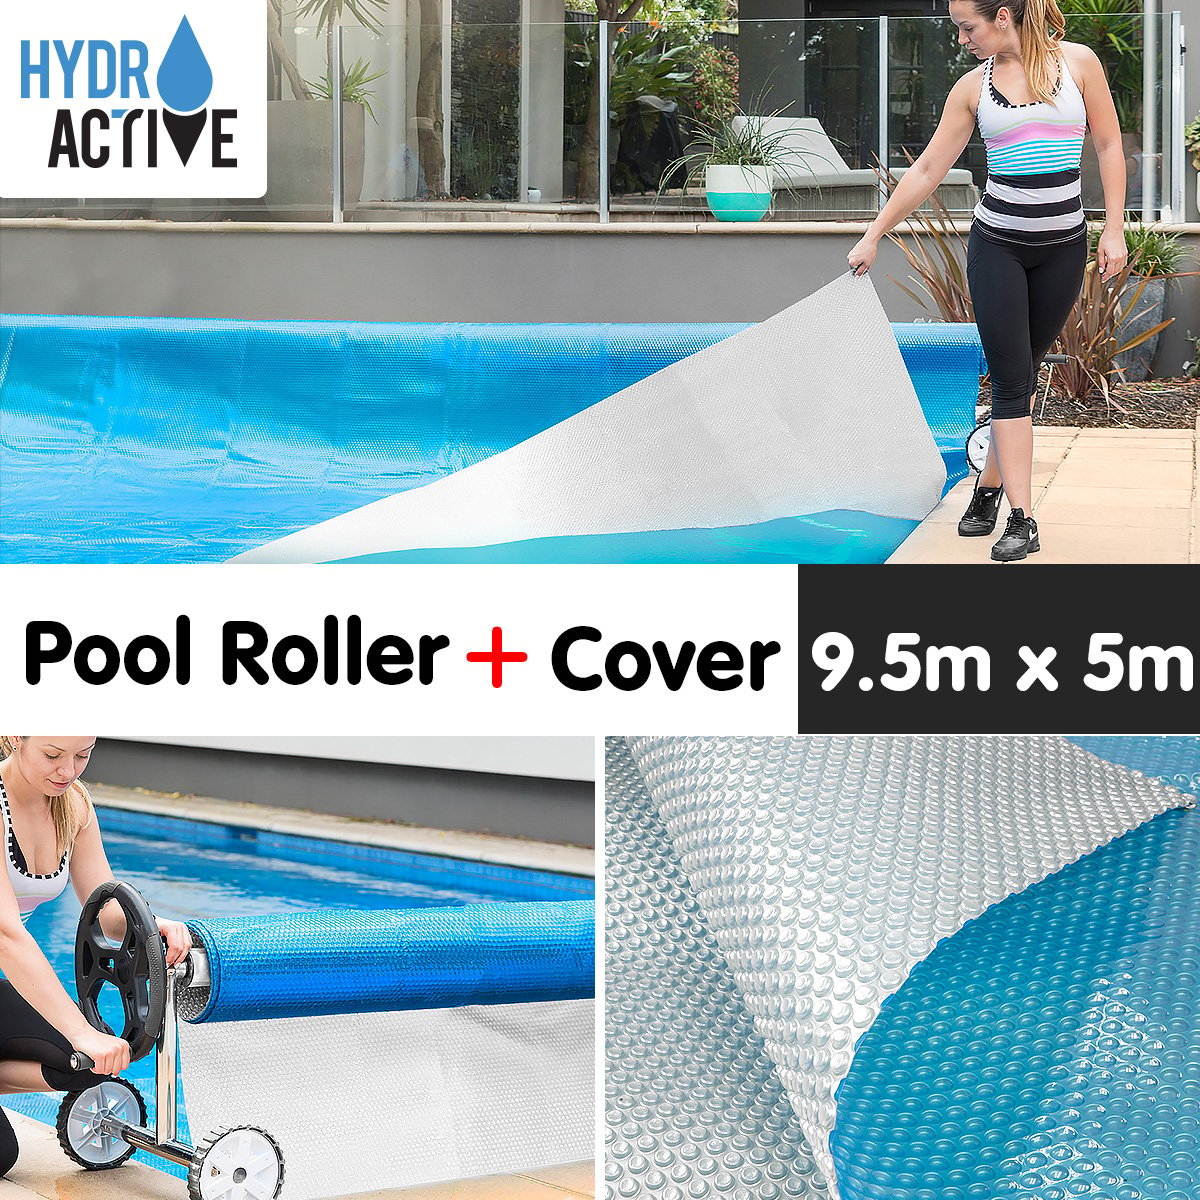 400micron Swimming Pool Roller Cover Combo - Silver/Blue - 9.5m x 5m 1